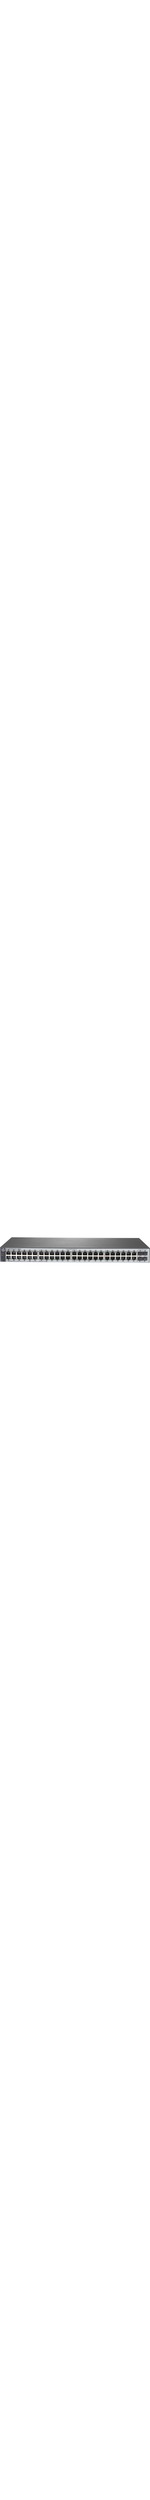 HP 1820-48G 48 Ports Manageable Ethernet Switch